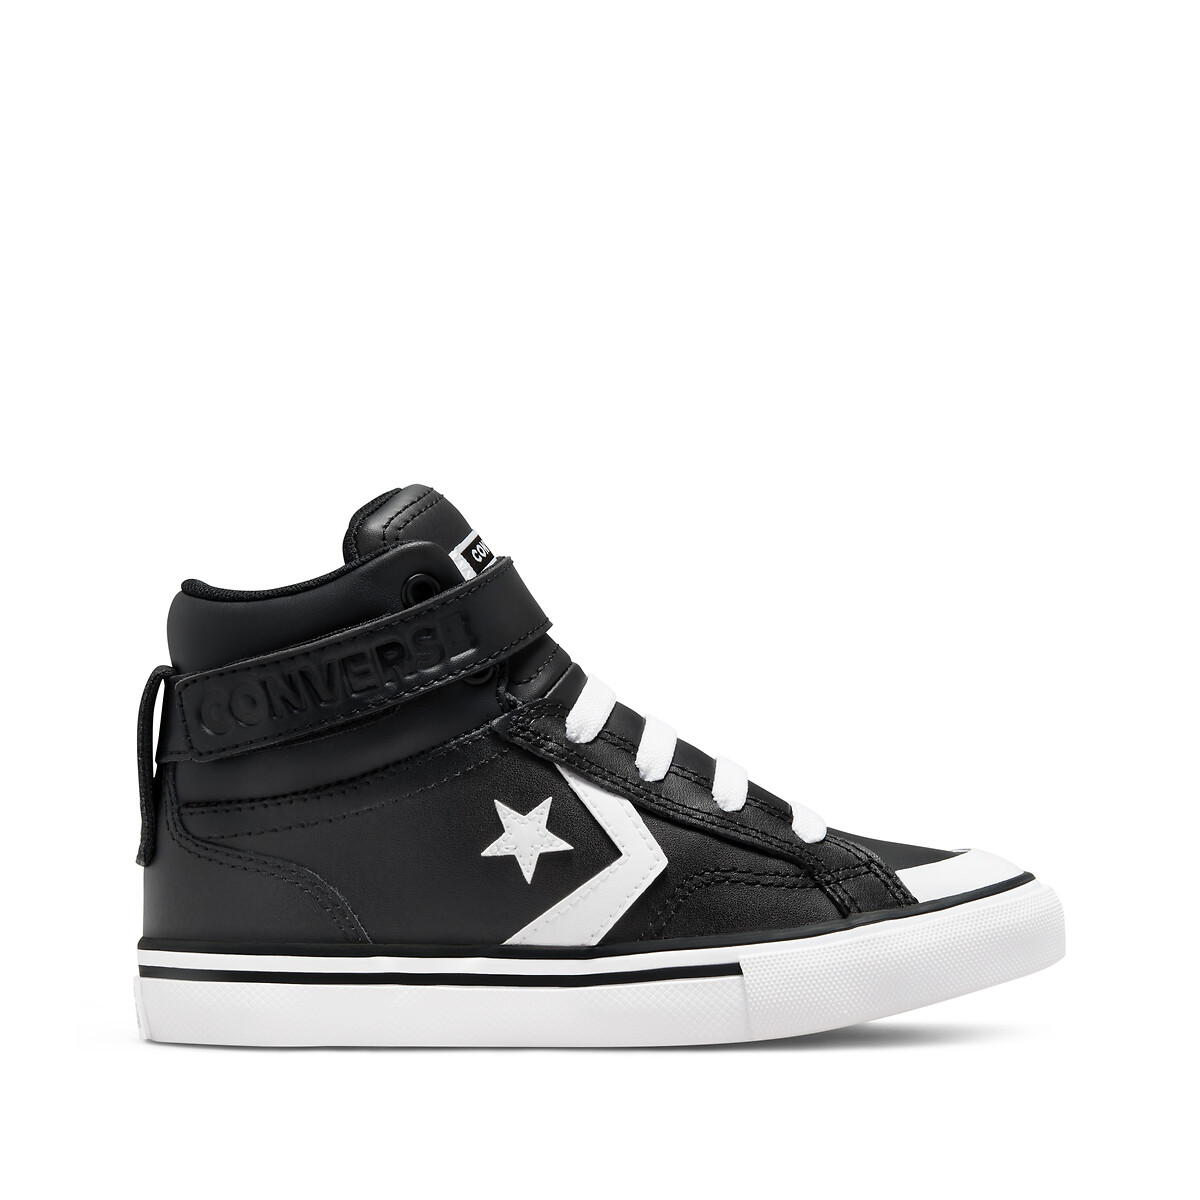 Kids Pro Blaze Foundational Leather High Top Trainers